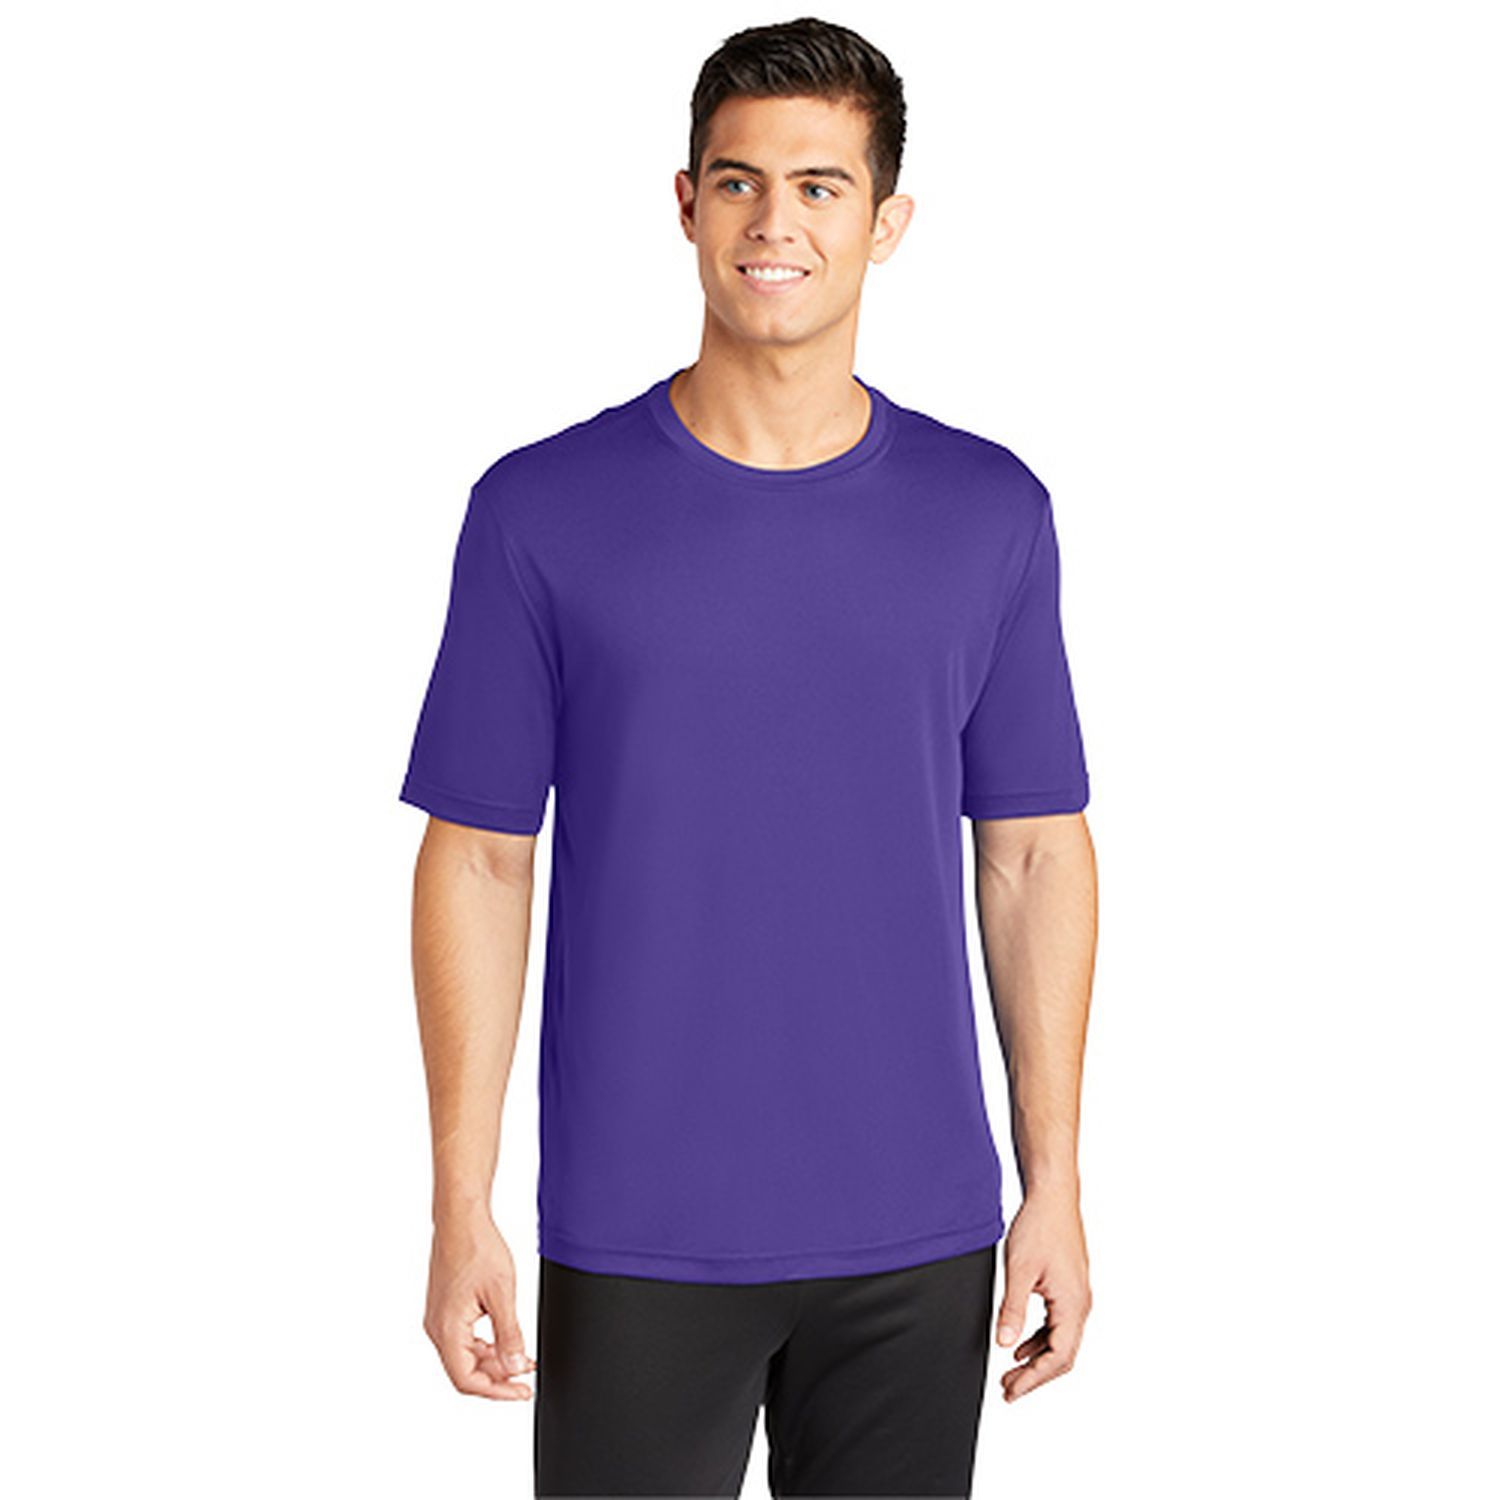 Sport-Tek® PosiCharge® Competitor™ Adult Unisex 3.8-ounce 100% Polyester Short Sleeve Performance T-shirt